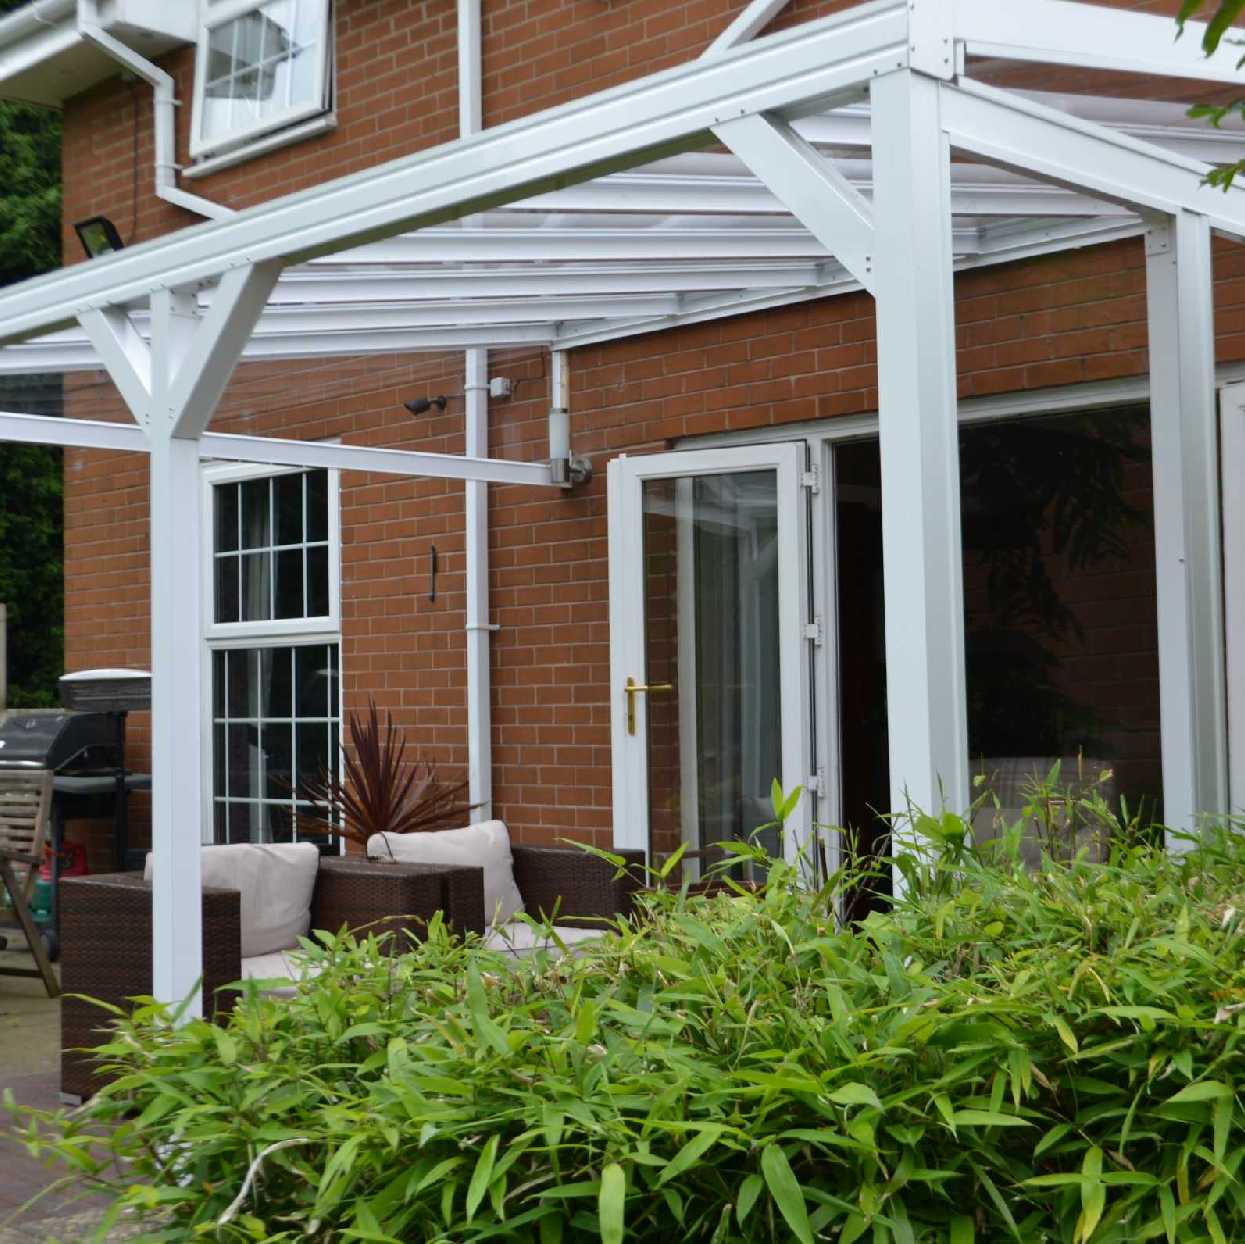 Omega Smart Lean-To Canopy, White with 6mm Glass Clear Plate Polycarbonate Glazing - 8.4m (W) x 4.0m (P), (4) Supporting Posts from Omega Build